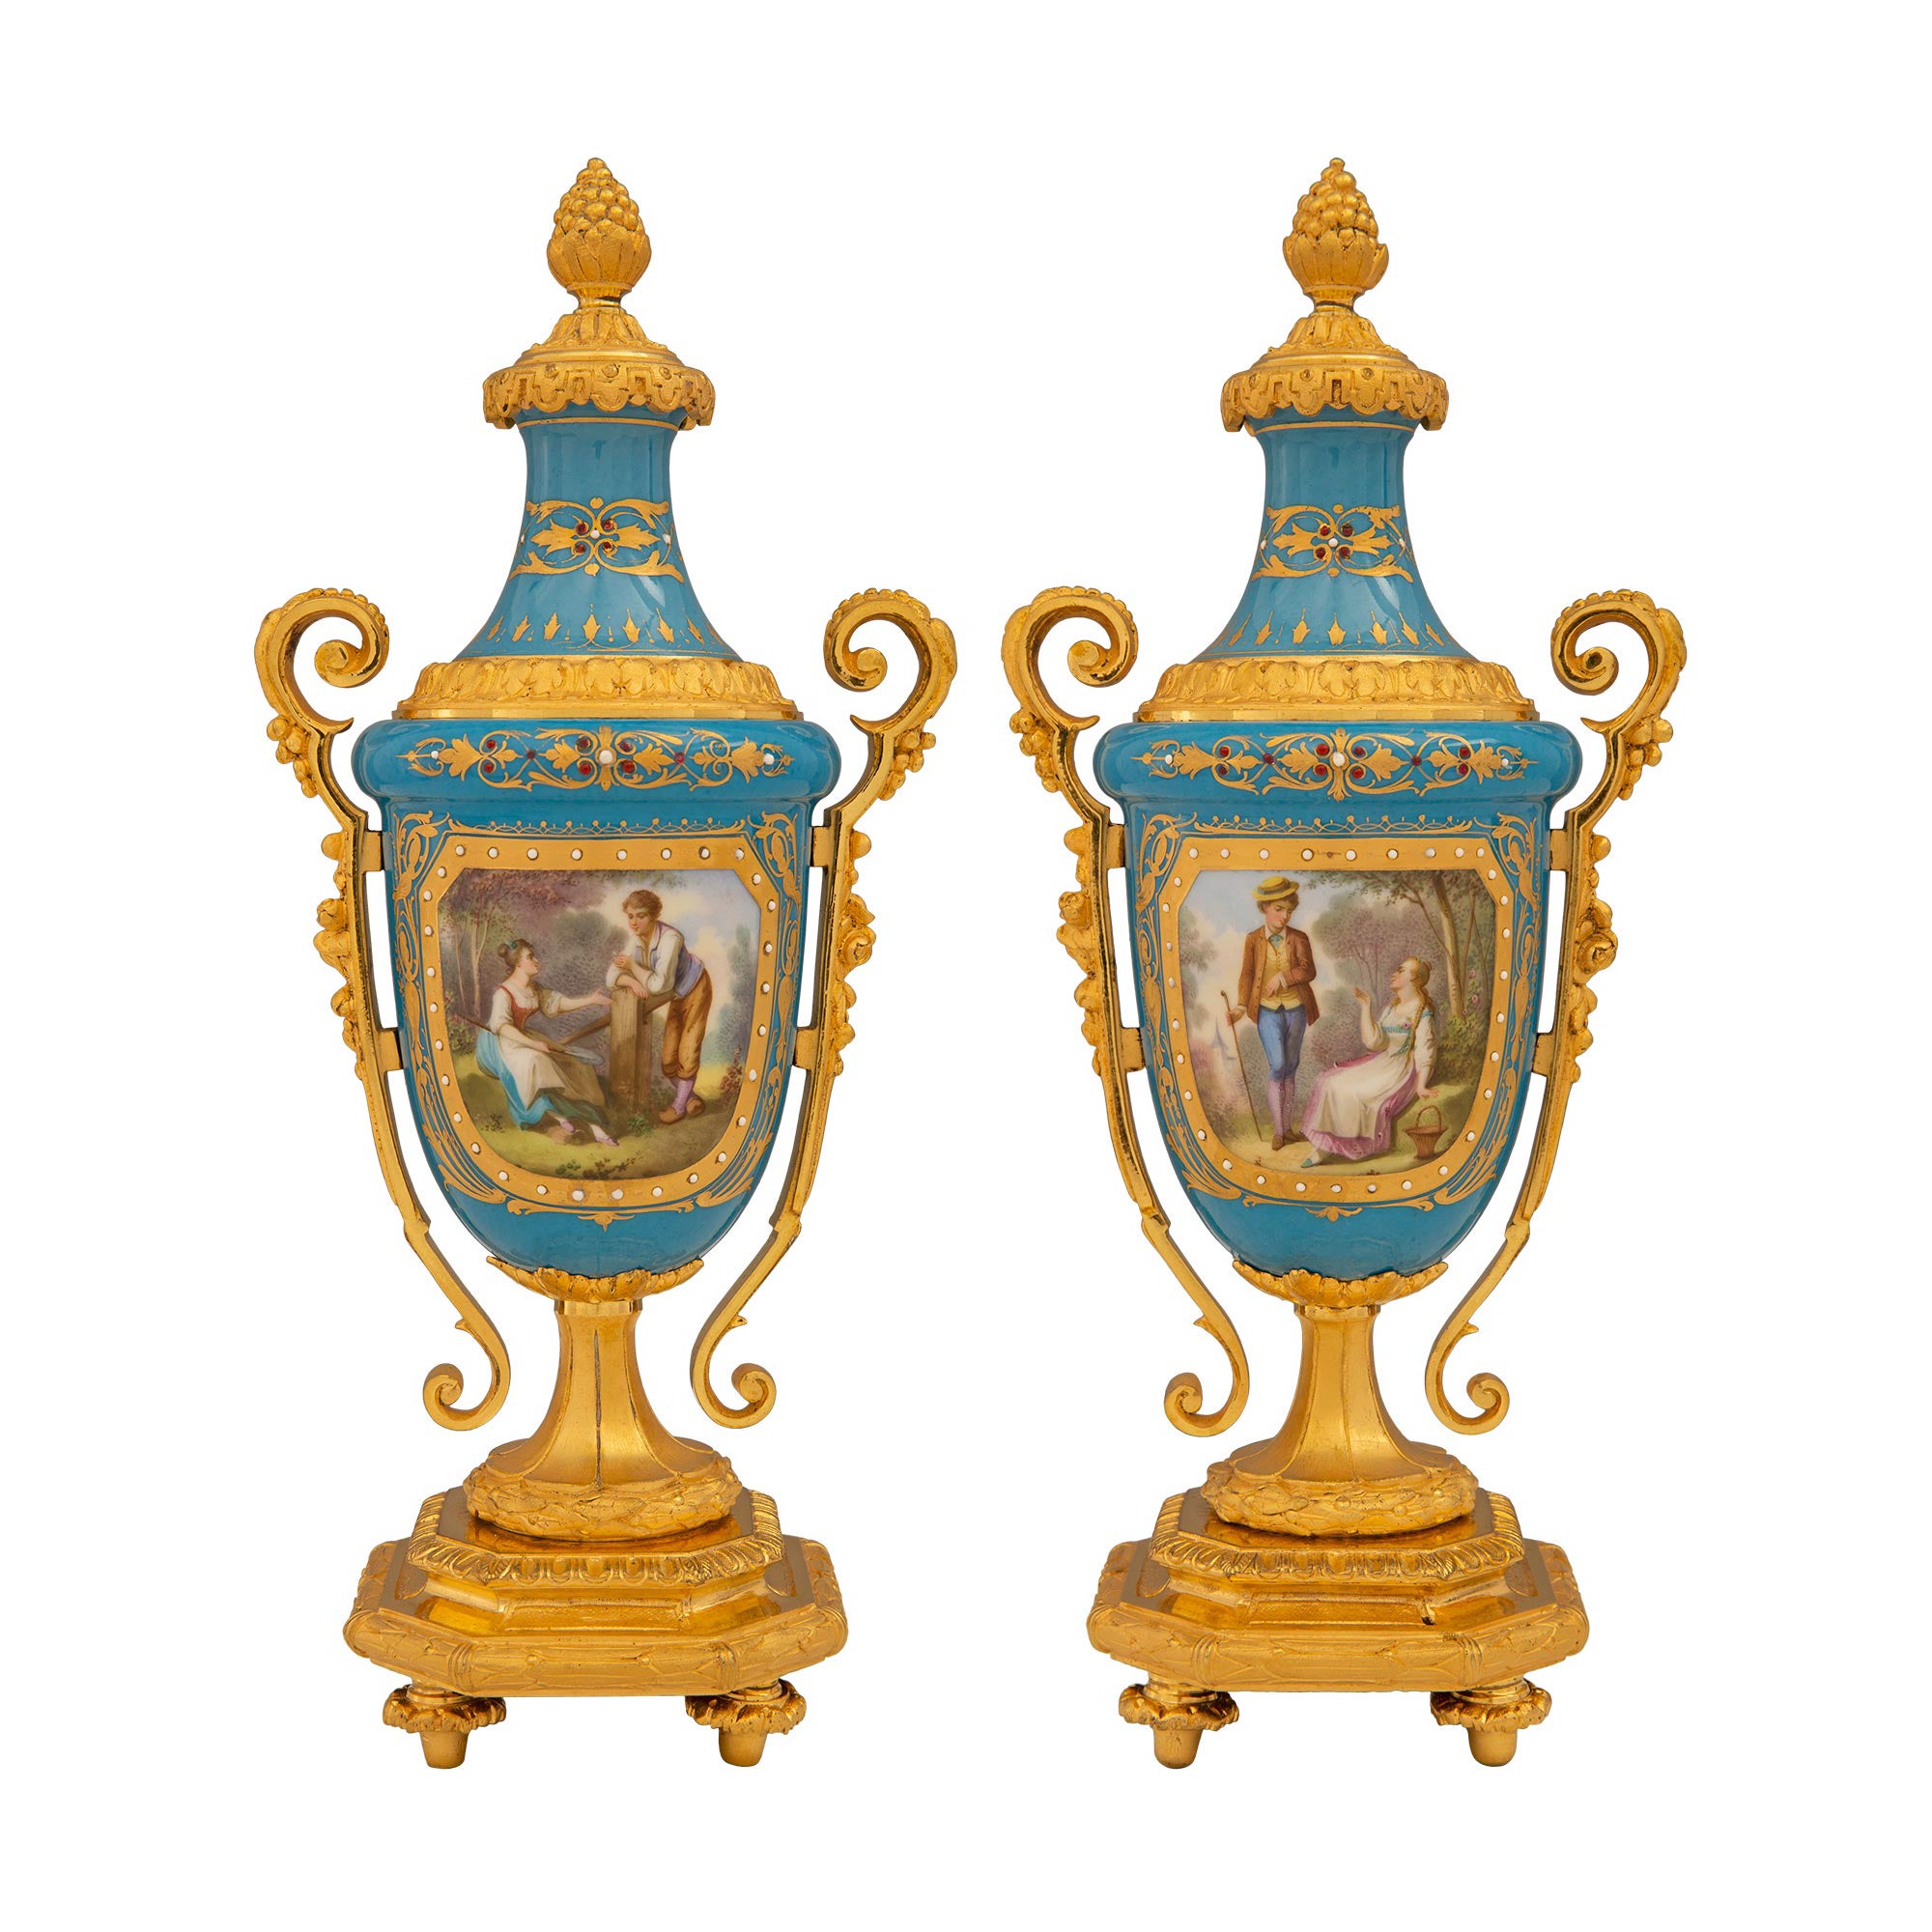 Pair Of French 19th Century Louis XVI St. Sèvres Porcelain & Ormolu Lidded Urns For Sale